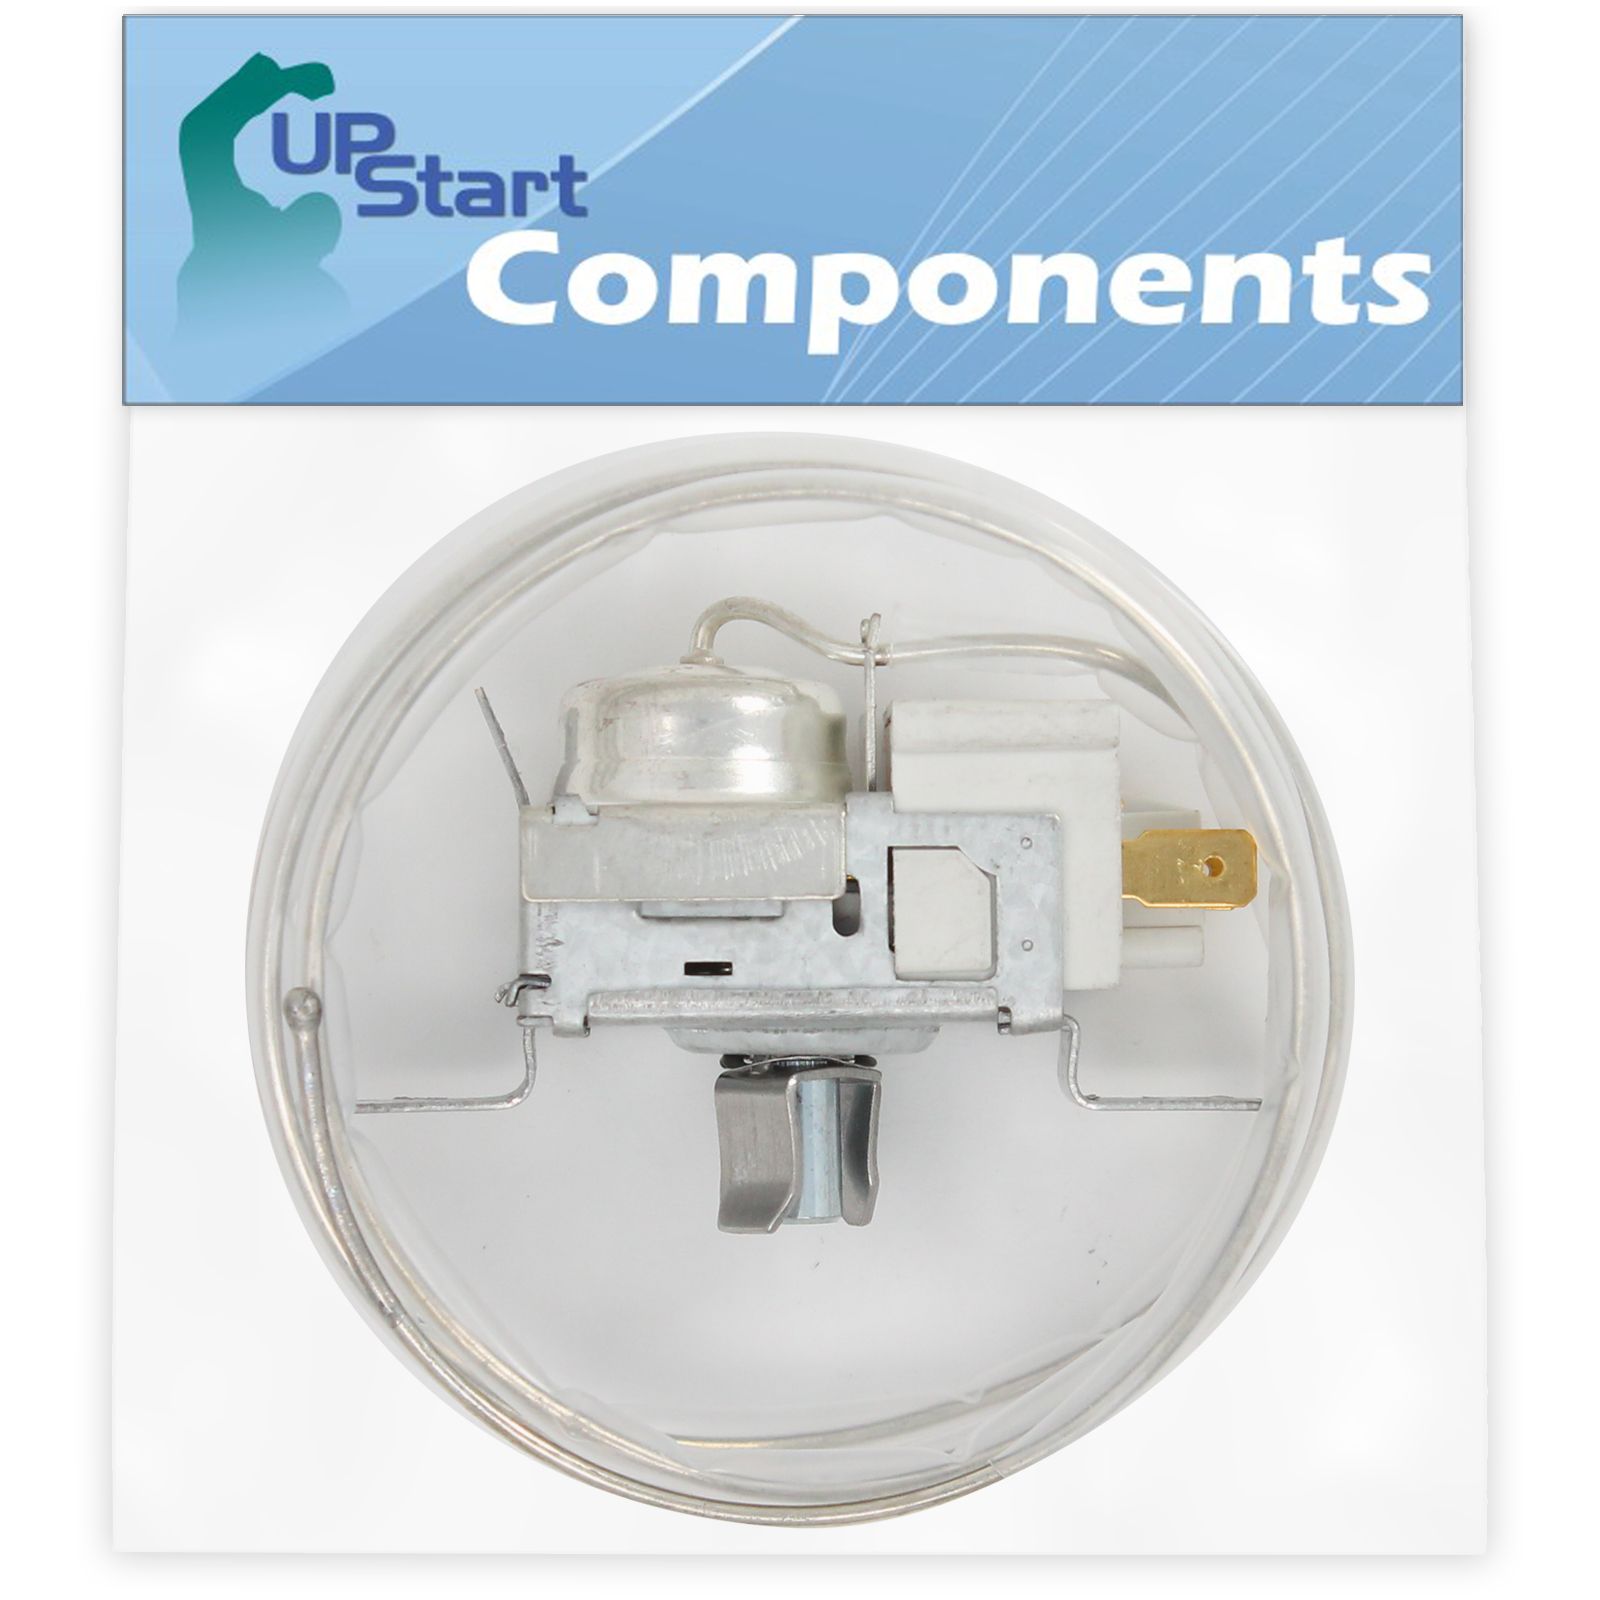 2198202 Cold Control Thermostat Replacement for Whirlpool GD25DQXFW00 Refrigerator - Compatible with WP2198202 Refrigerator Temperature Control Thermostat - UpStart Components Brand - image 1 of 3